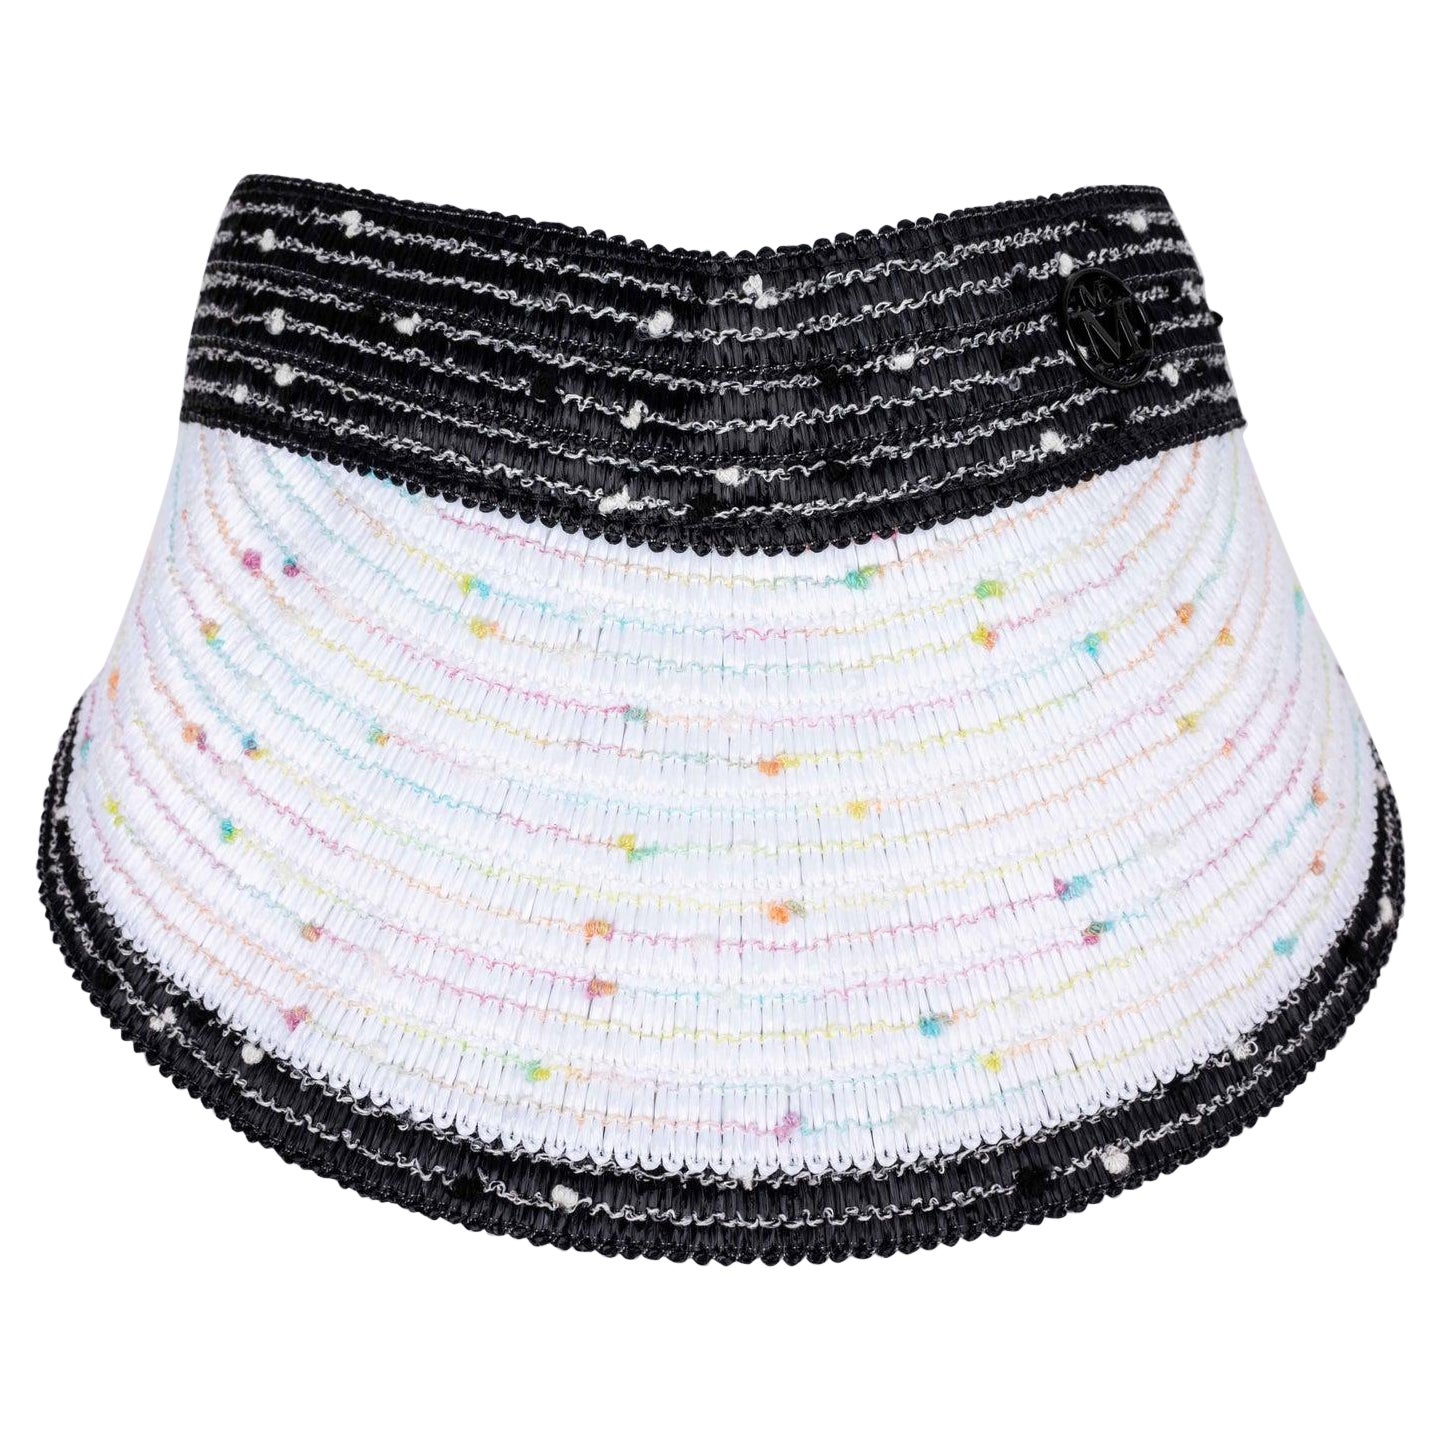 Maison Michel Eyeshade in Black and White Raffia Hat For Sale